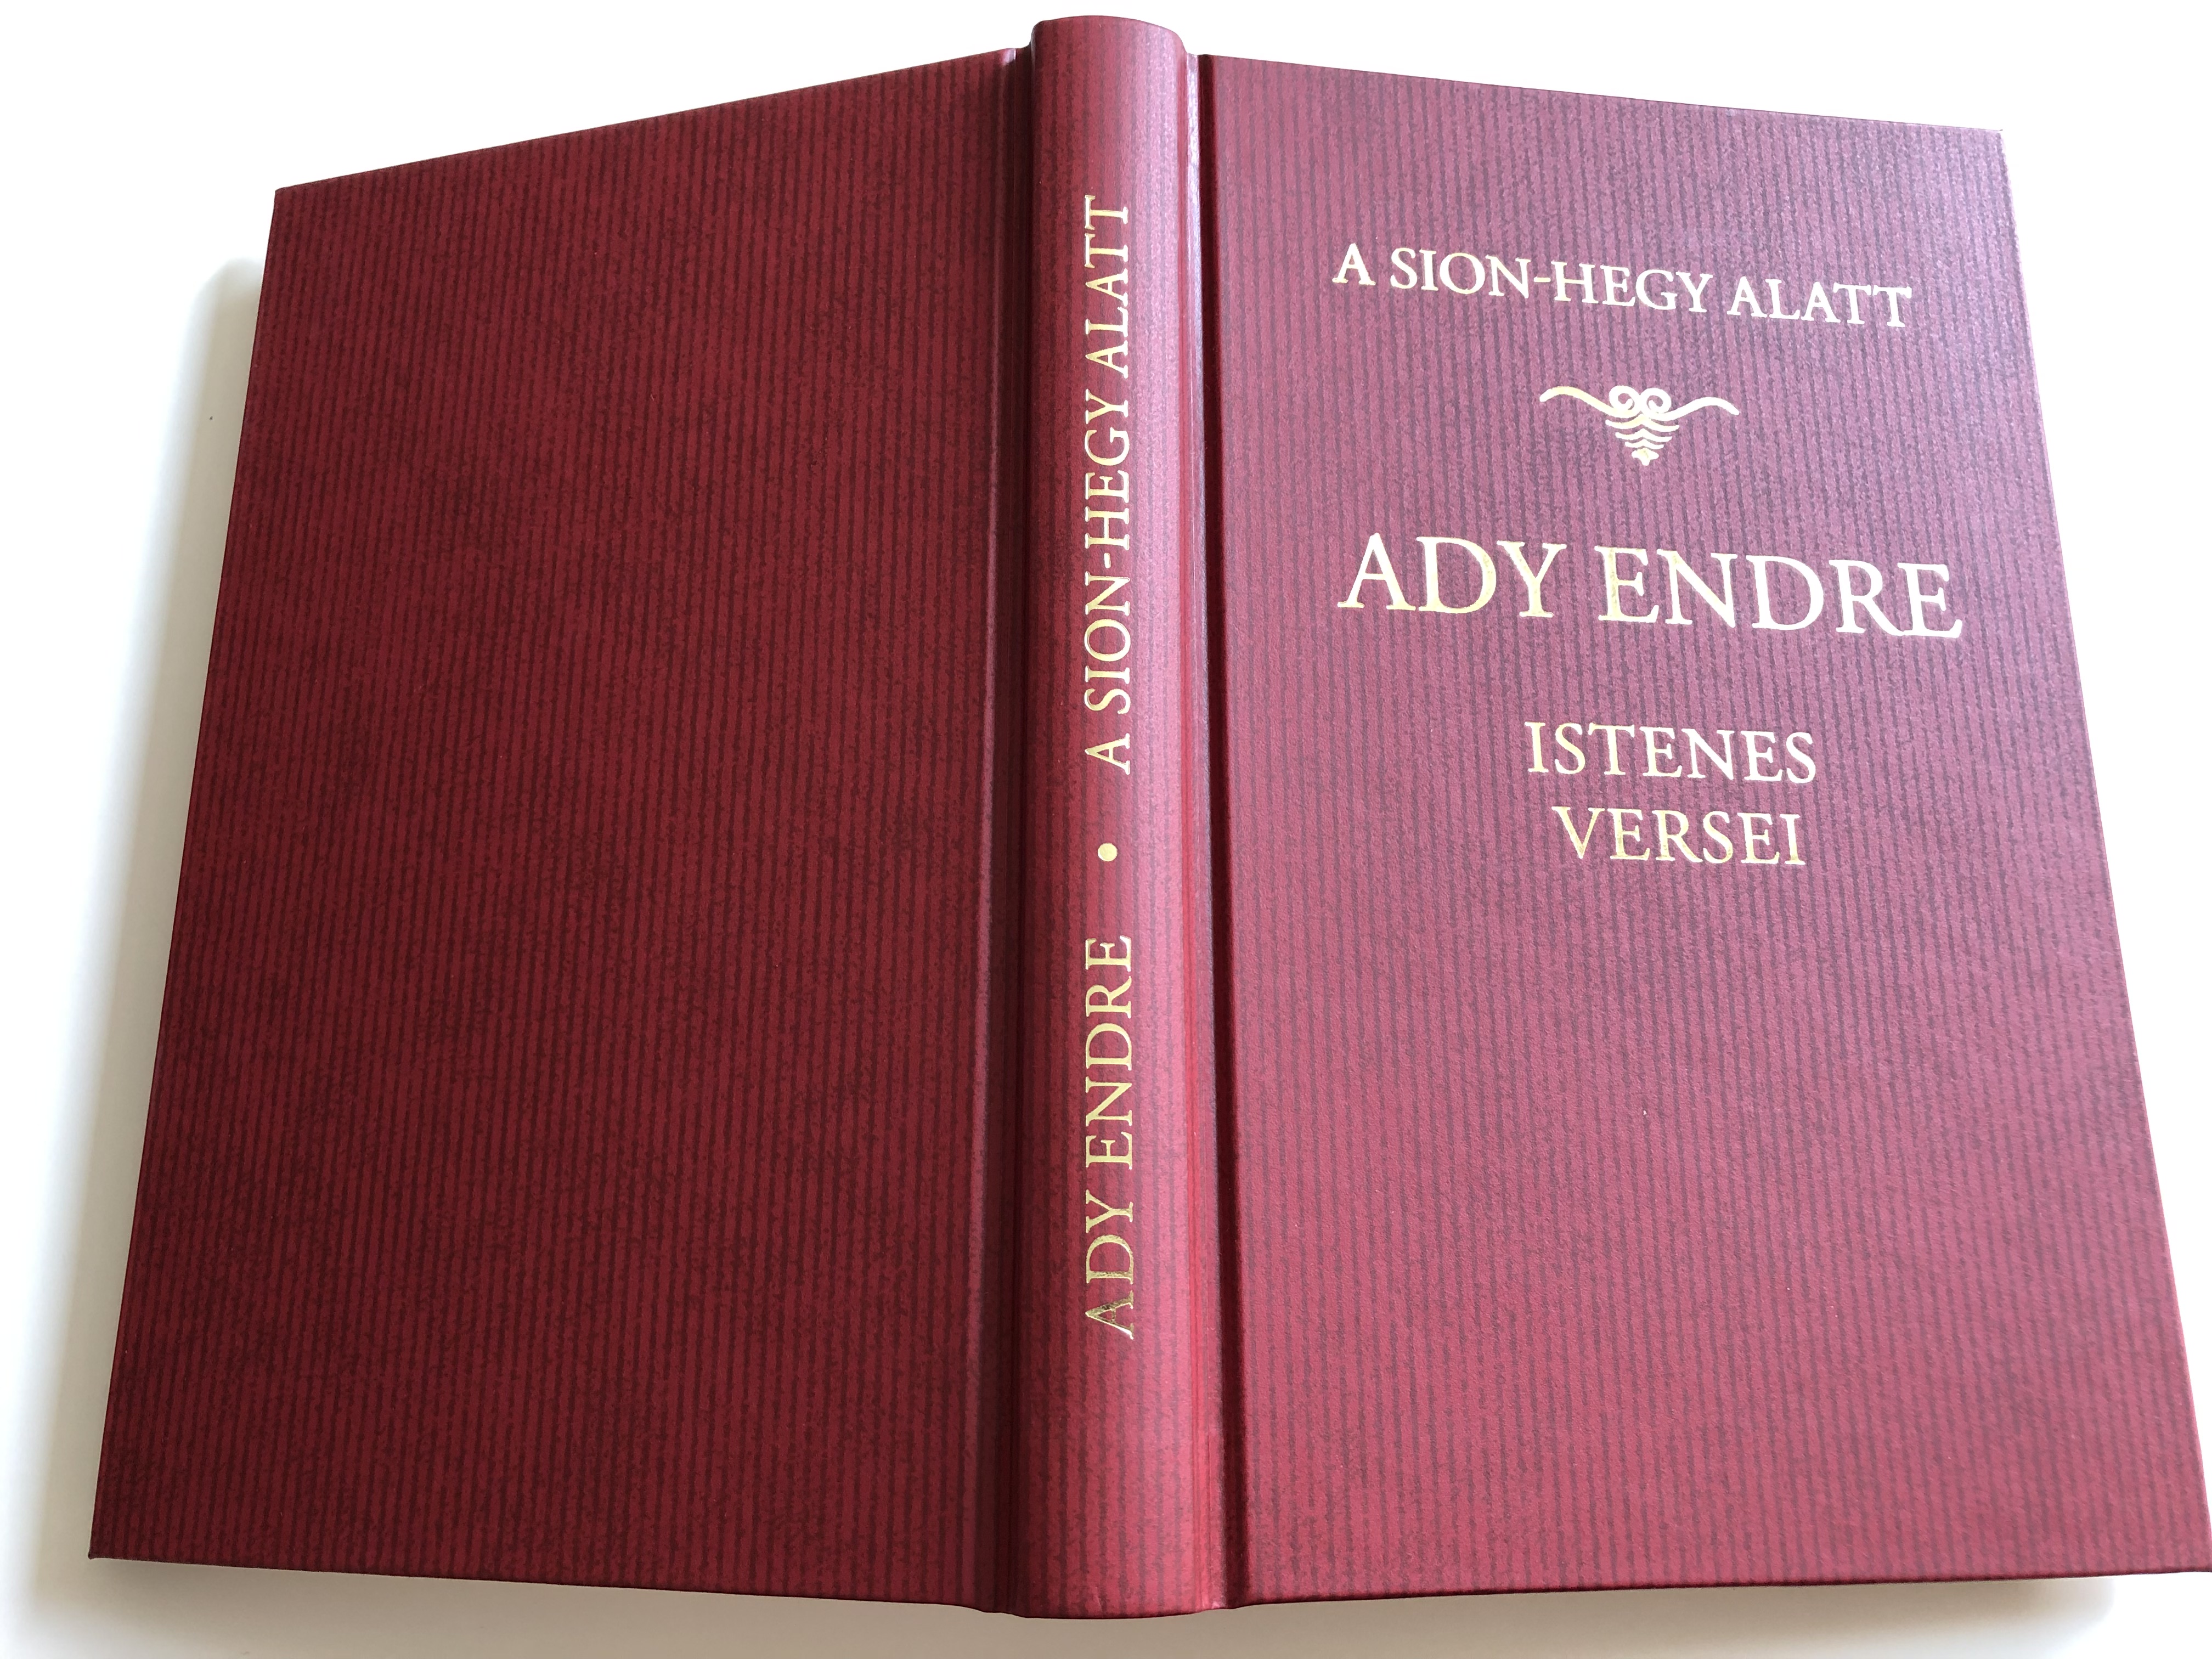 a-sion-hegy-alatt-by-ady-endre-ady-endre-istenes-versei-ady-endre-s-poems-about-god-editor-szab-l-rinc-szent-istv-n-t-rsulat-hardcover-2019-2-.jpg